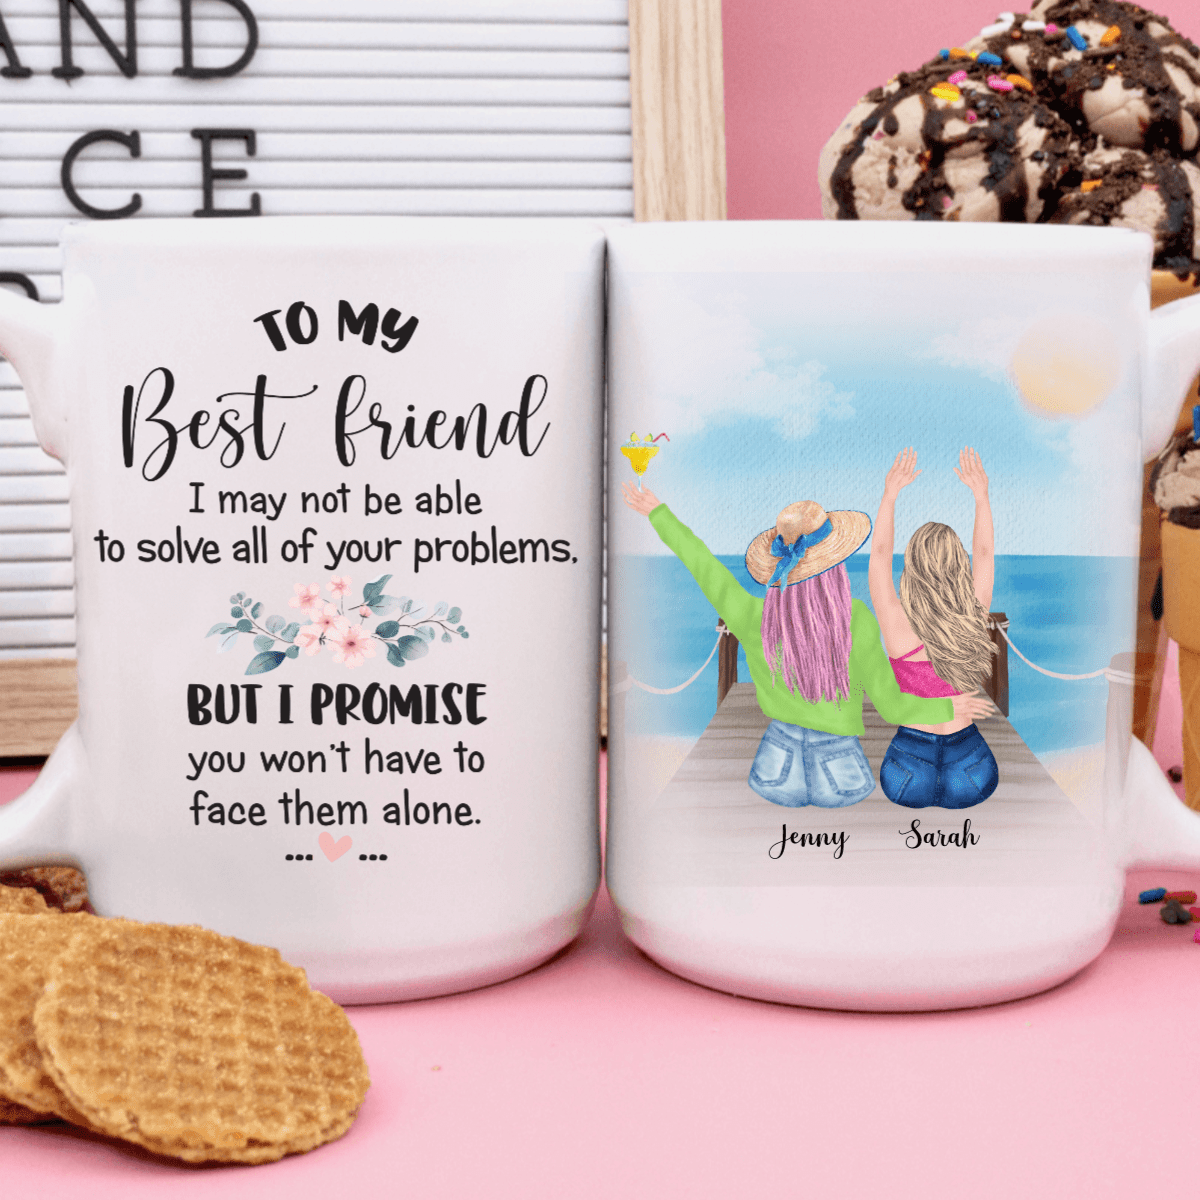 GeckoCustom Personalized Custom Coffee Mug, Best Friend Gift, You Won't Have To Face Them Alone 11oz